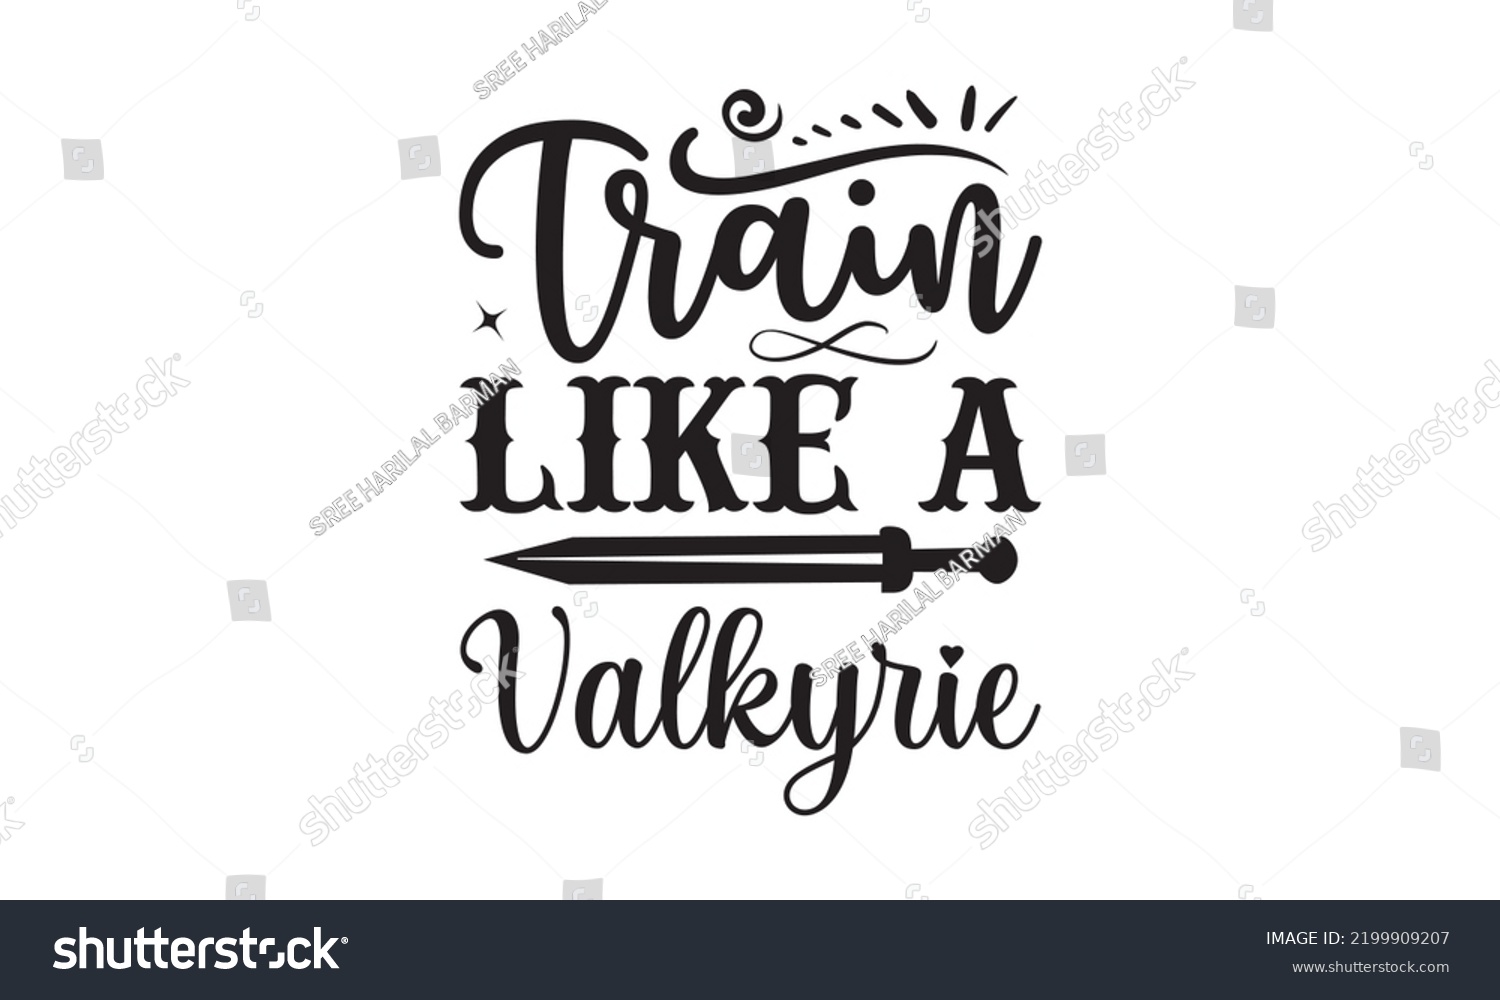 SVG of Train like a Valkyrie - Train SVG t-shirt design, Hand drew lettering phrases, templet, Calligraphy graphic design, SVG Files for Cutting Cricut and Silhouette. Eps 10
 svg